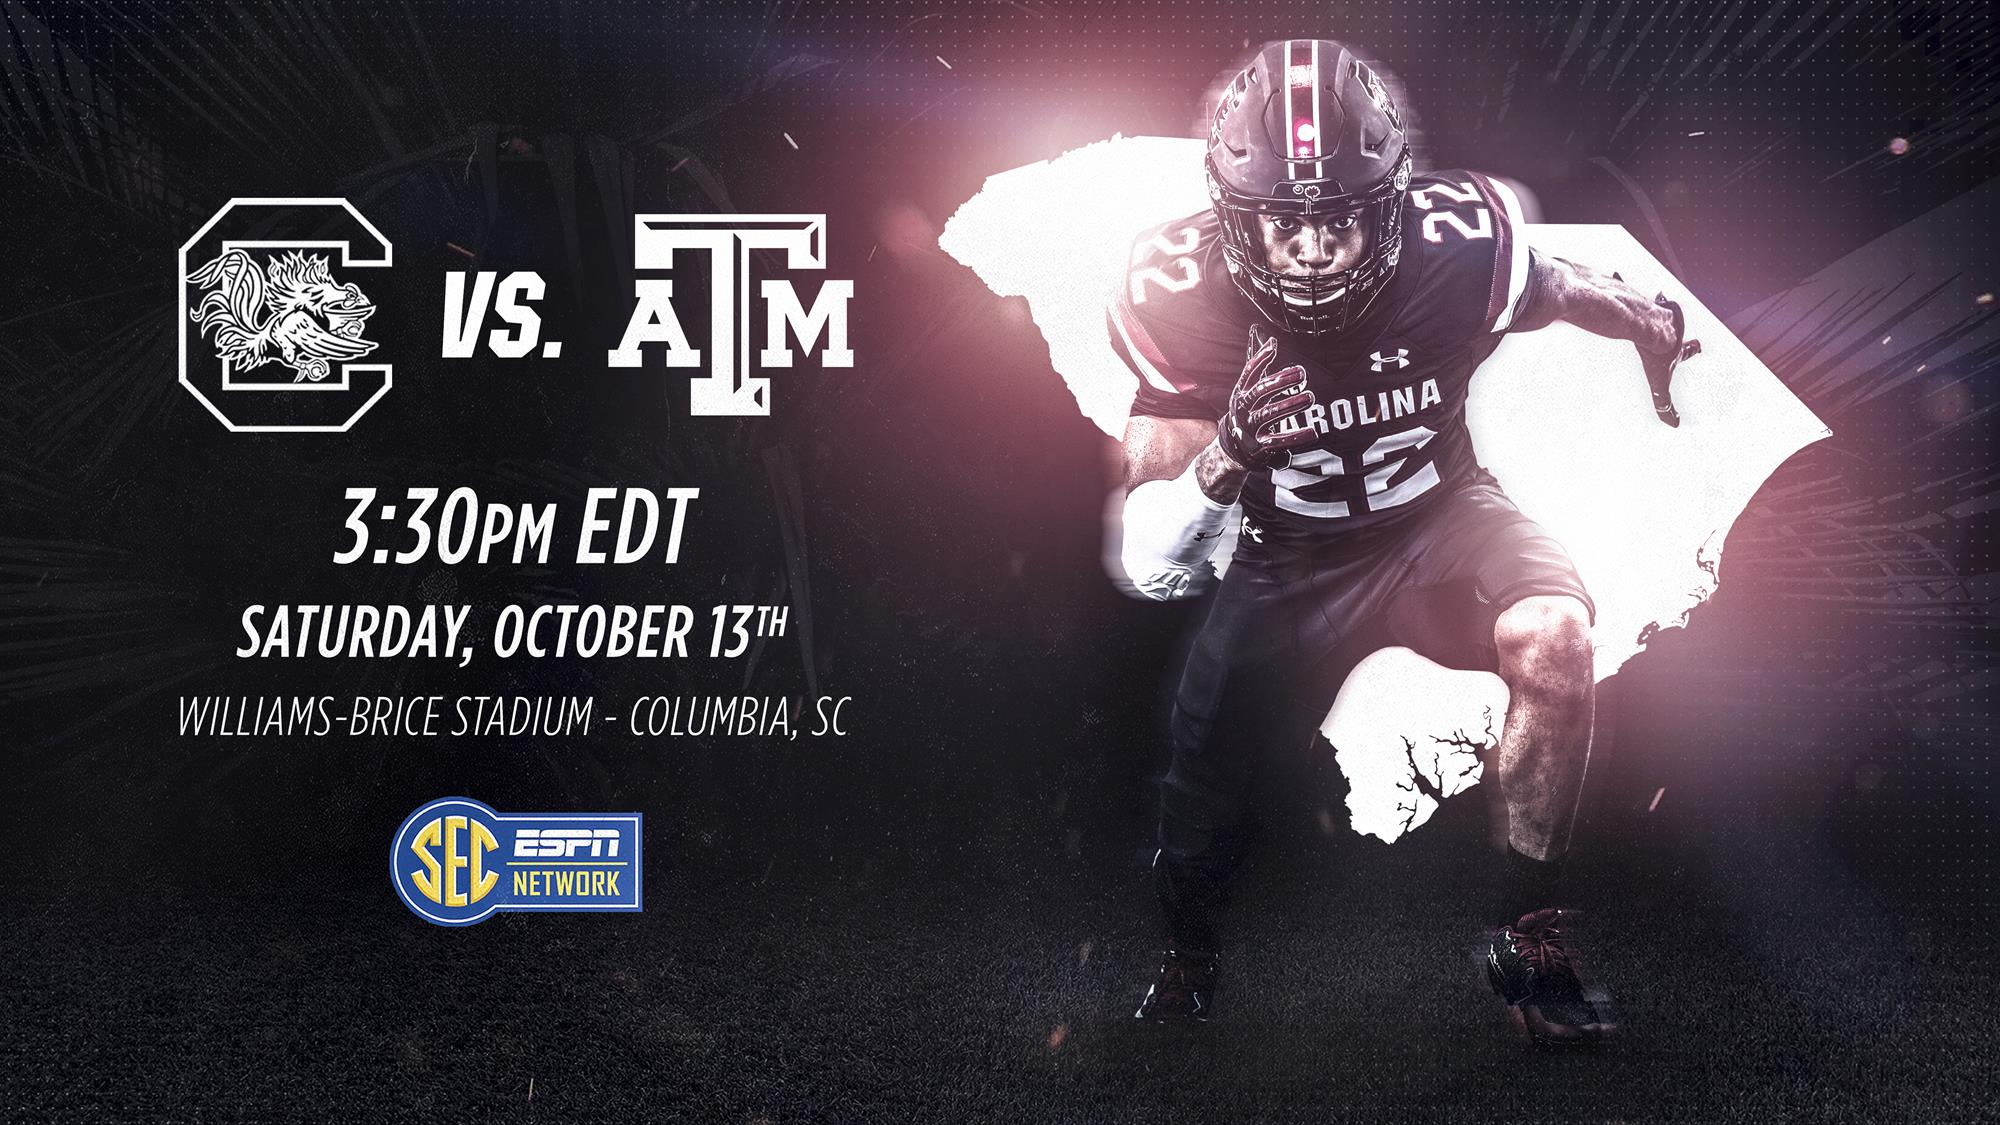 Gamecocks to Host Texas A&M Saturday